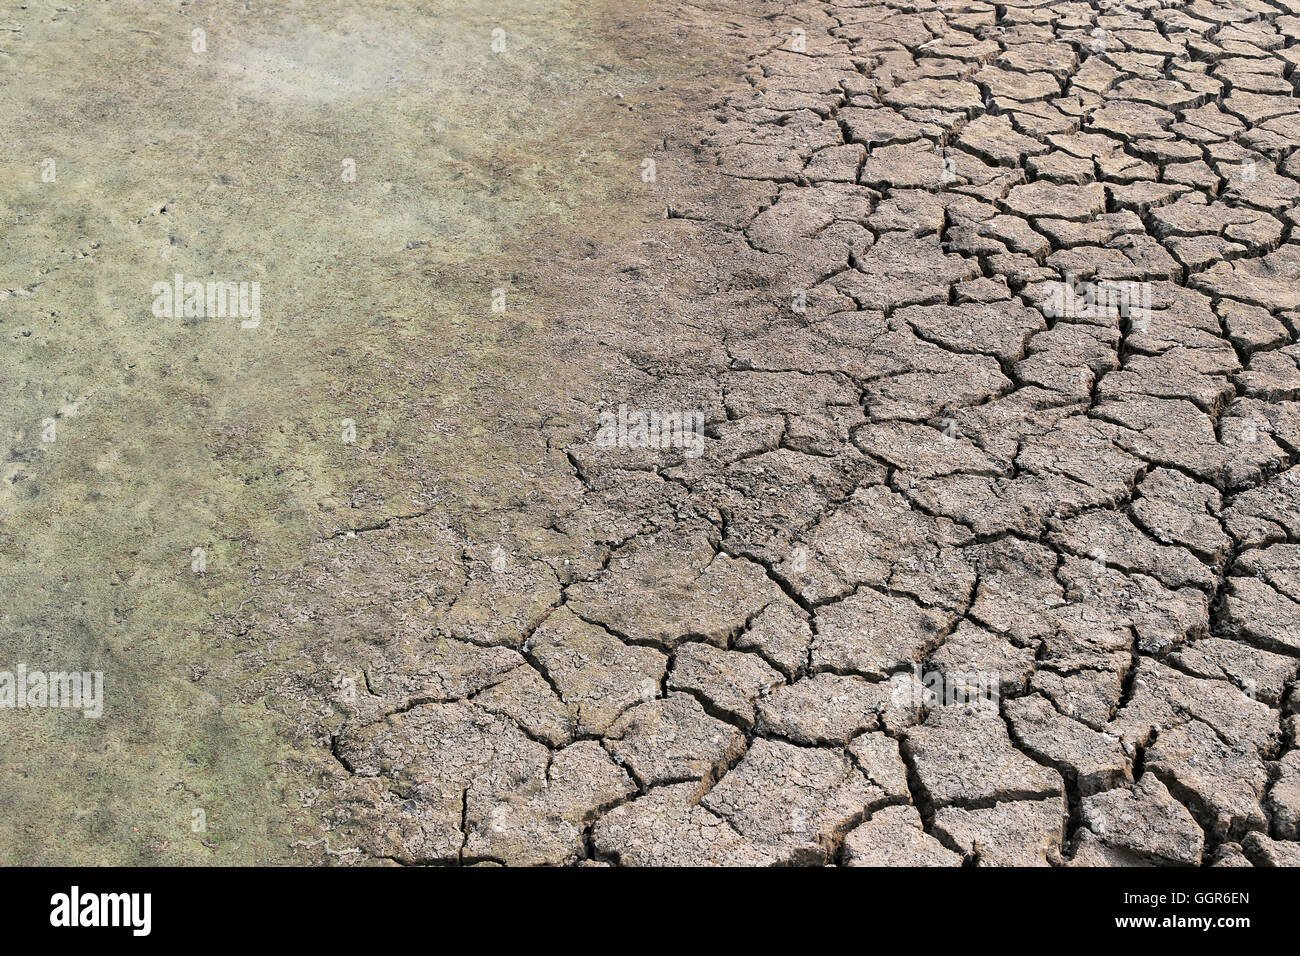 cracked earth and clay soil with water just to dry up because of the heat,countryside of Thailand. Stock Photo